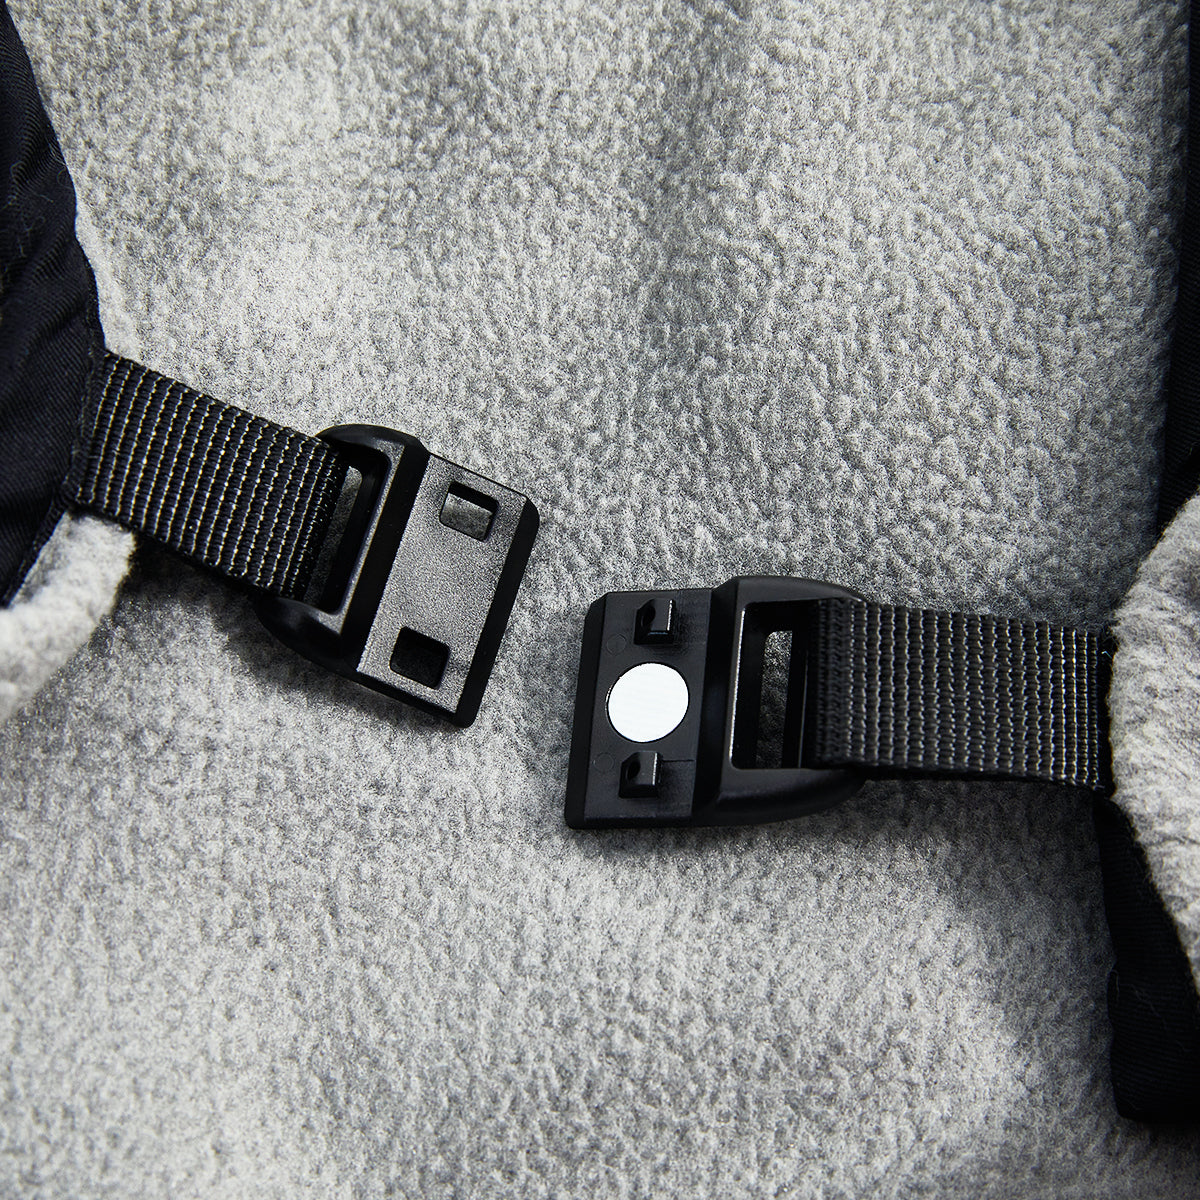 magnetic snap of battery heated blanket